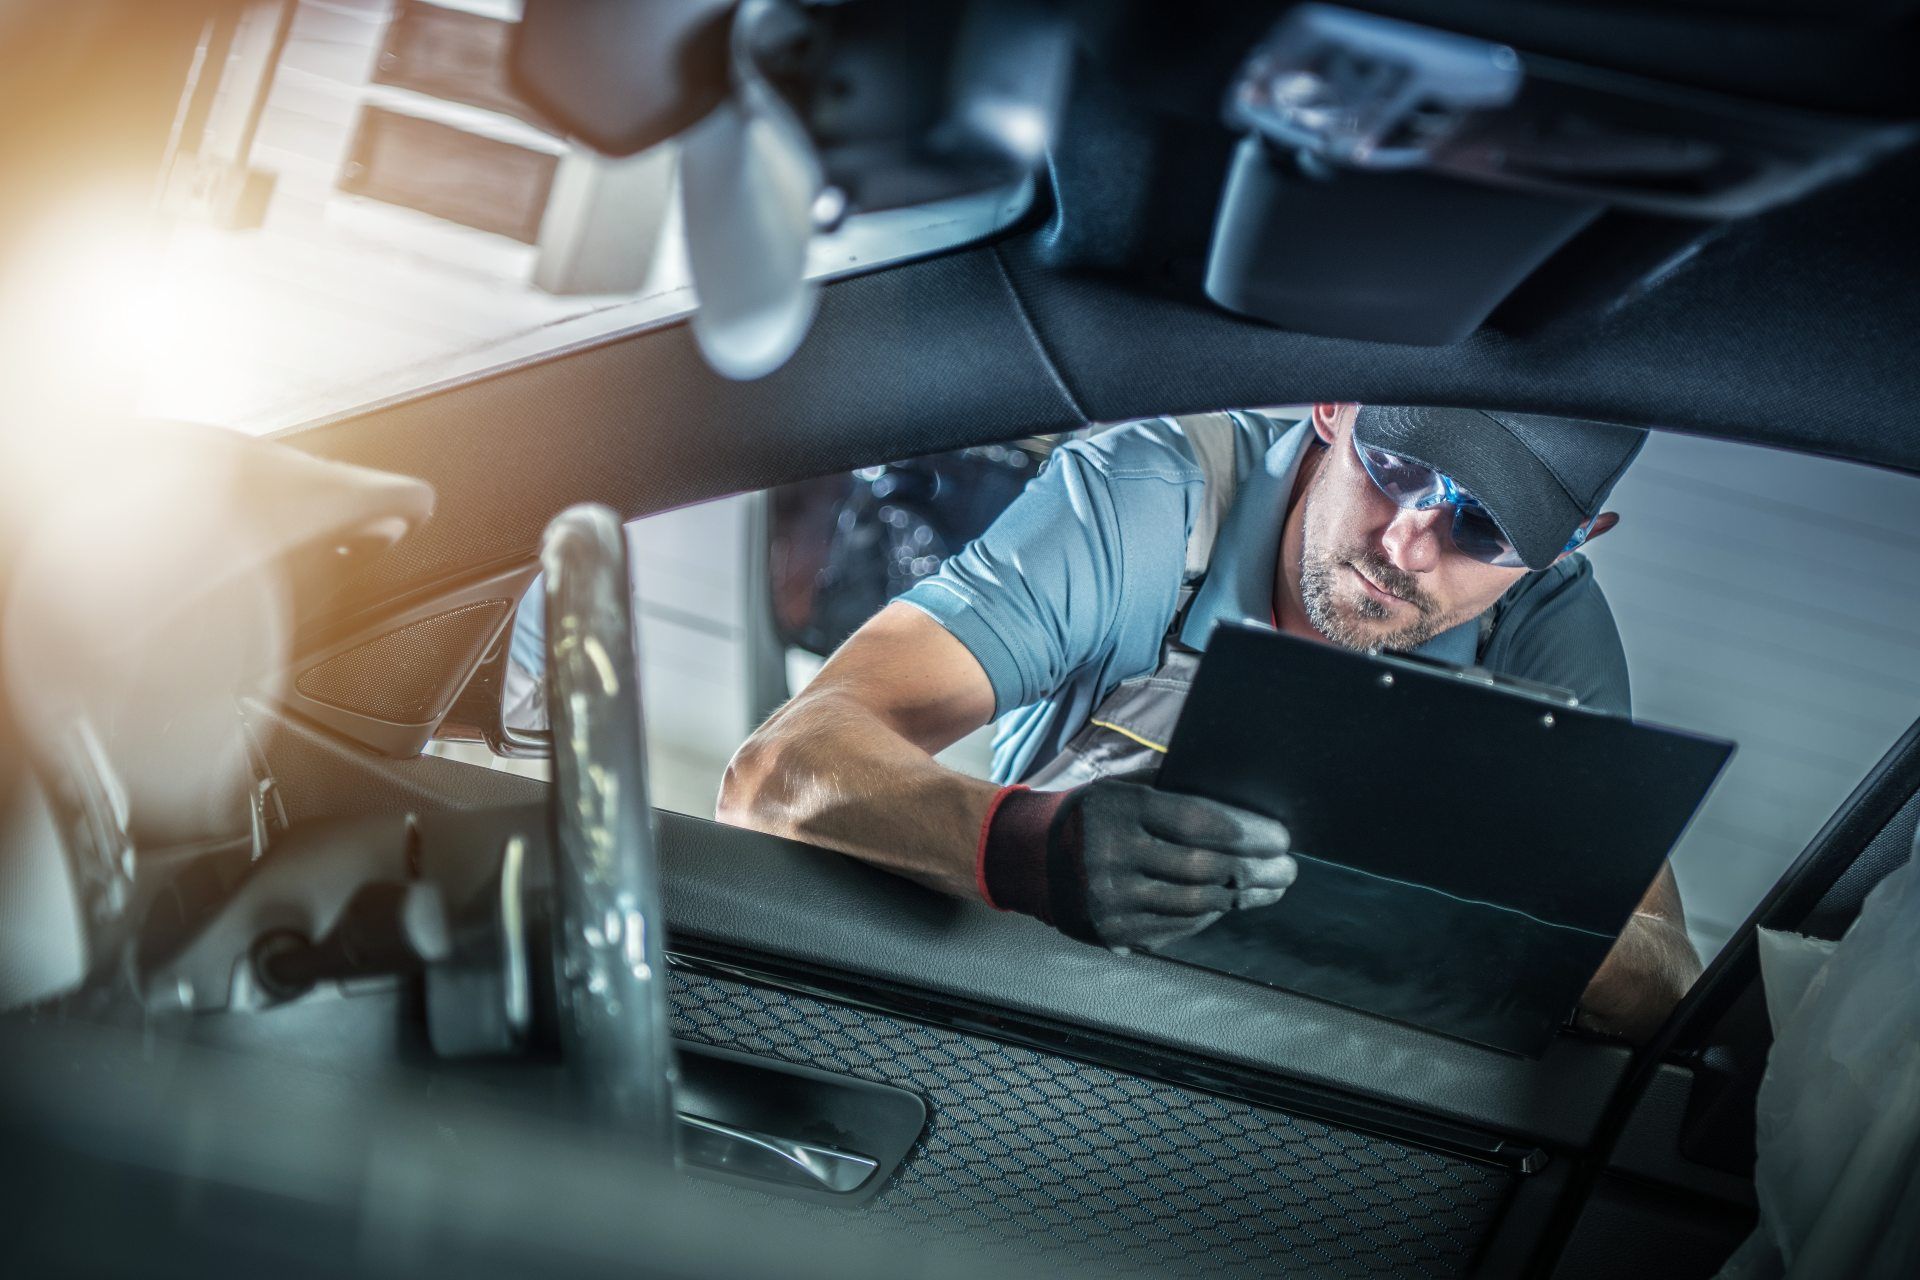 A car service technician holding a clipboard looks in the passenger-side front window of a vehicle - auto recalls